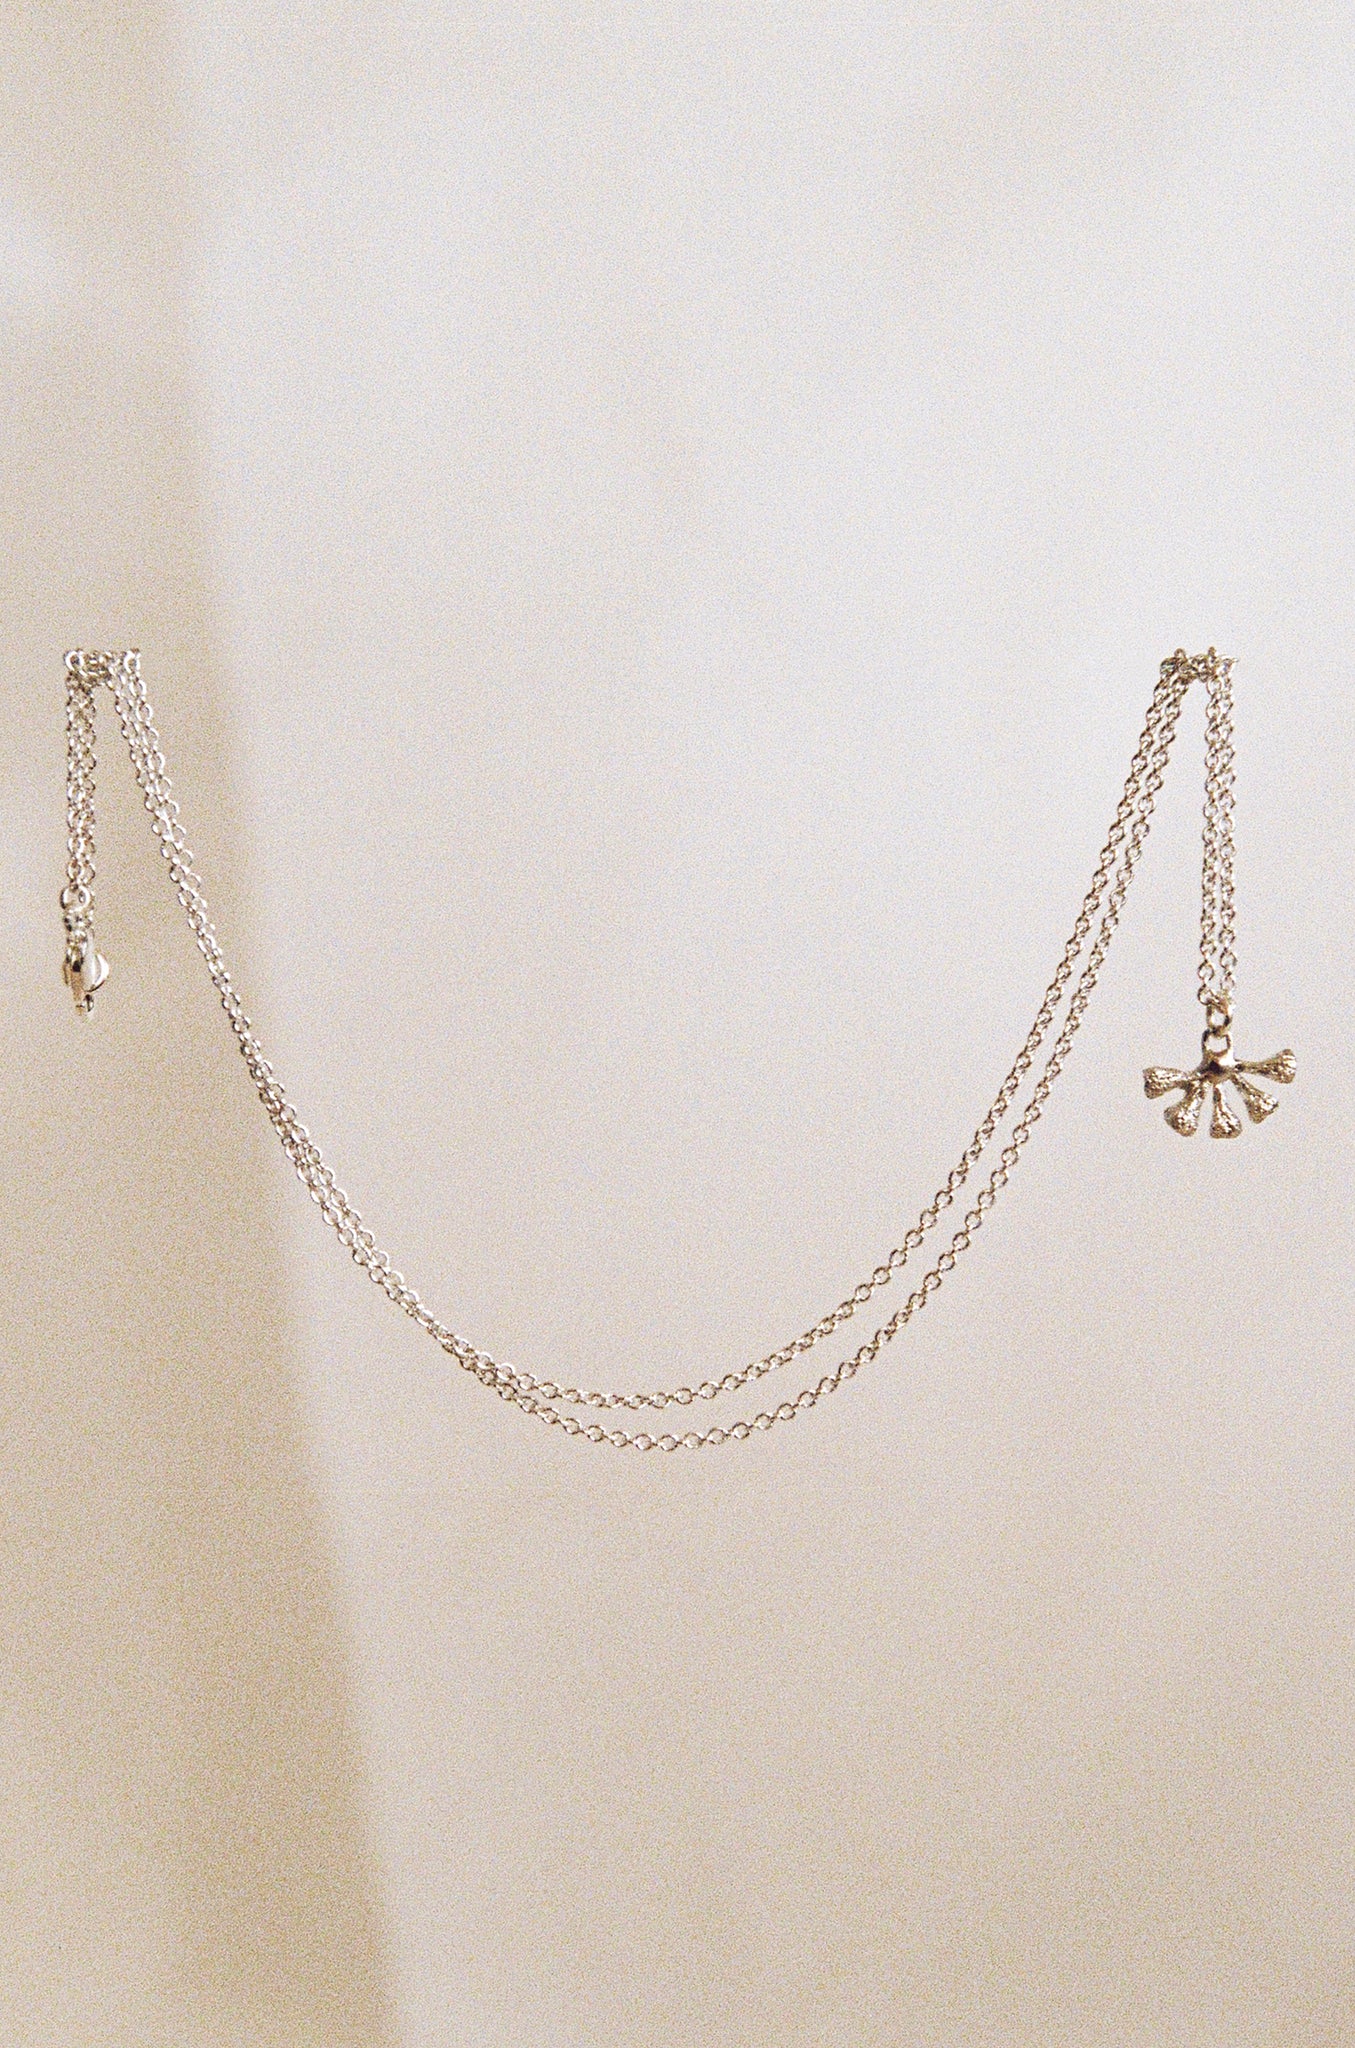 Alluvial Necklace - Sterling Silver